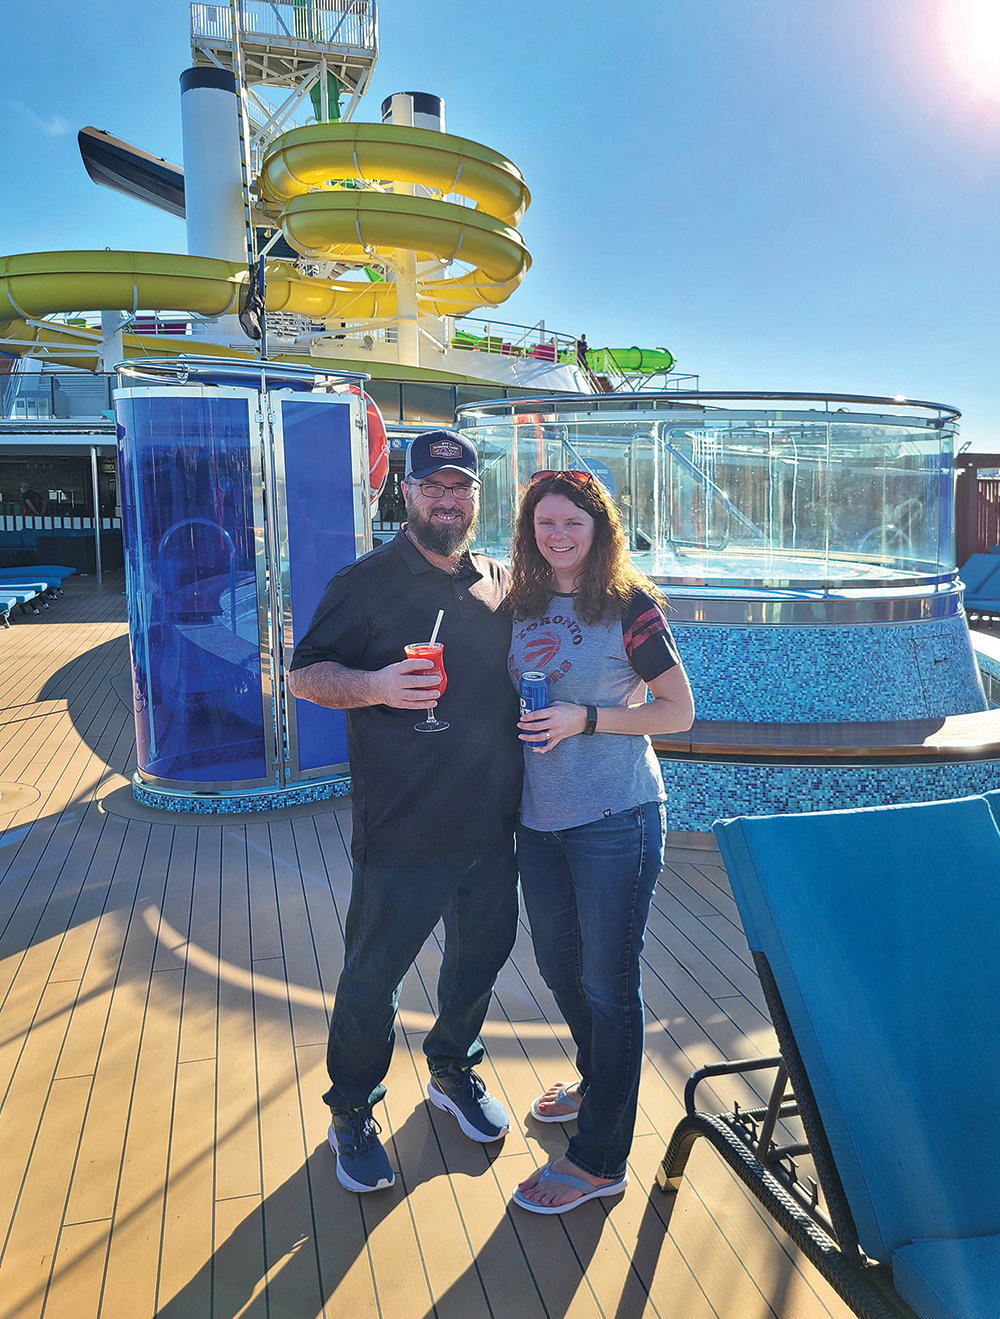 Cindy Caines and Ken Dillman sailed on the Carnival Miracle, departing from California on a two-week voyage to Hawaii.